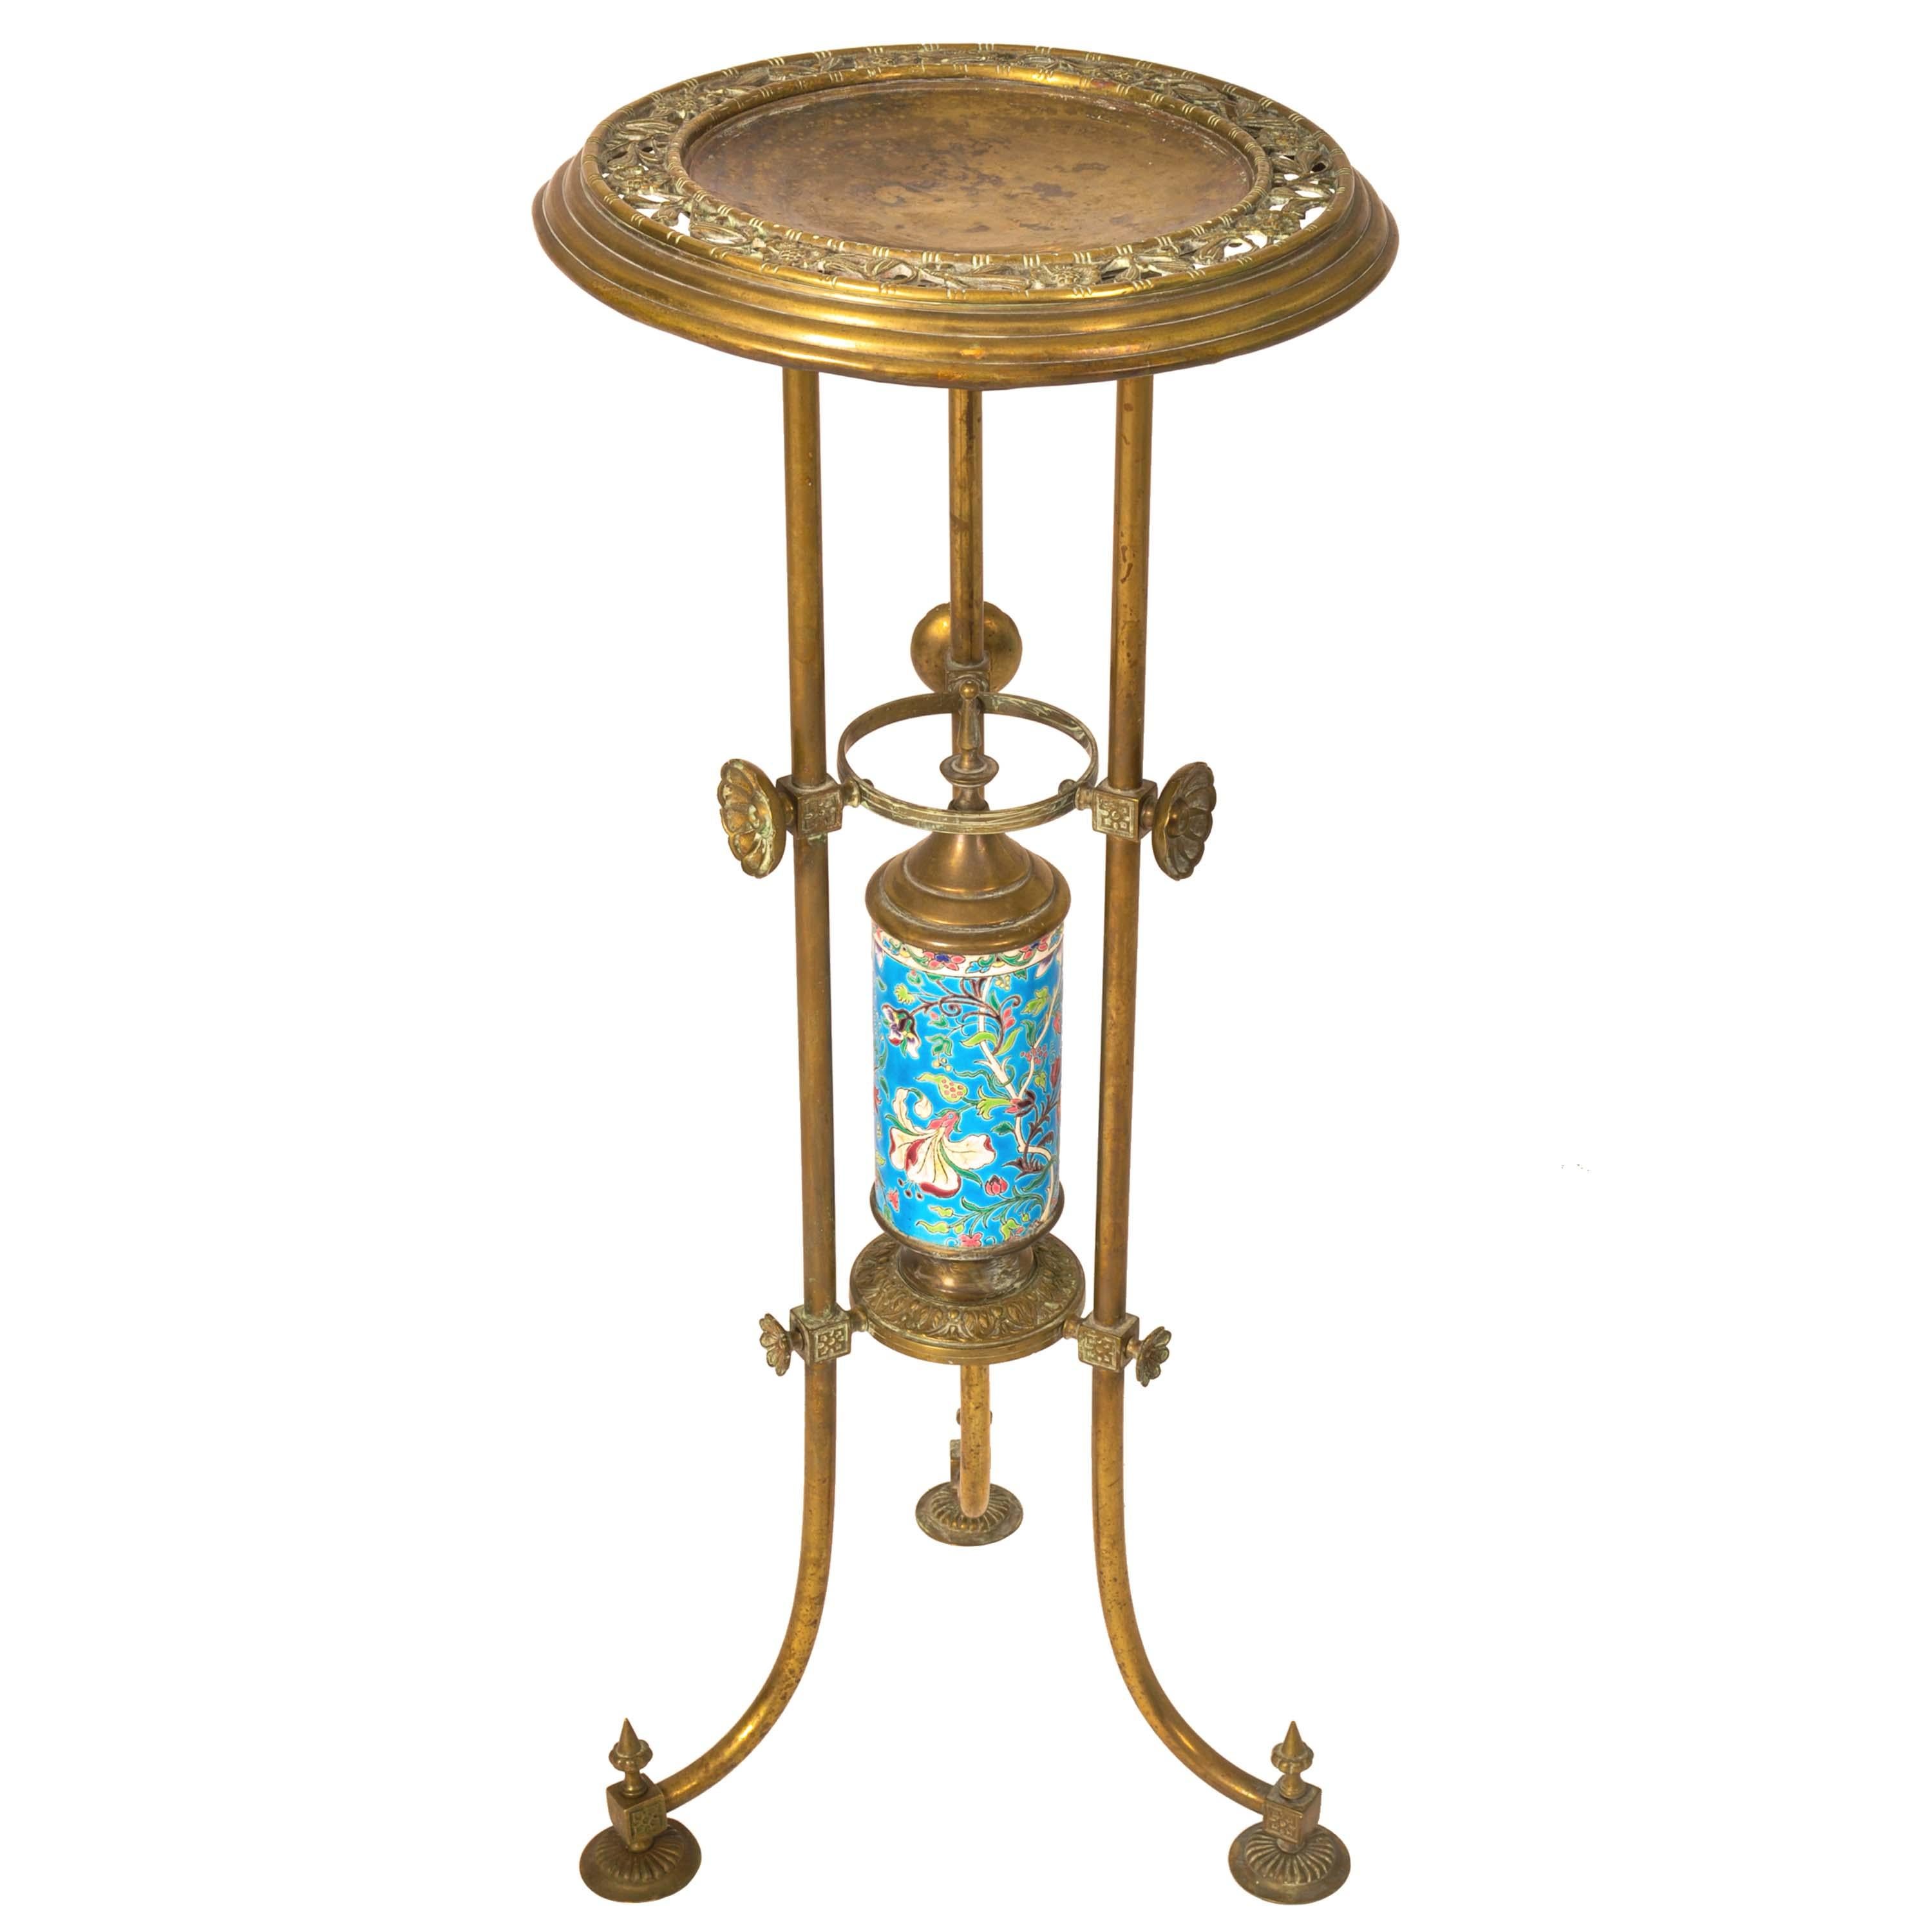 A rare & unusual American antique Aesthetic Movement brass plant stand, by Bradley and Hubbard and with a French Longwy faience pottery cylinder, circa 1875.
The tripod stand having a reticlated and engraved dished top with floral decoration, the